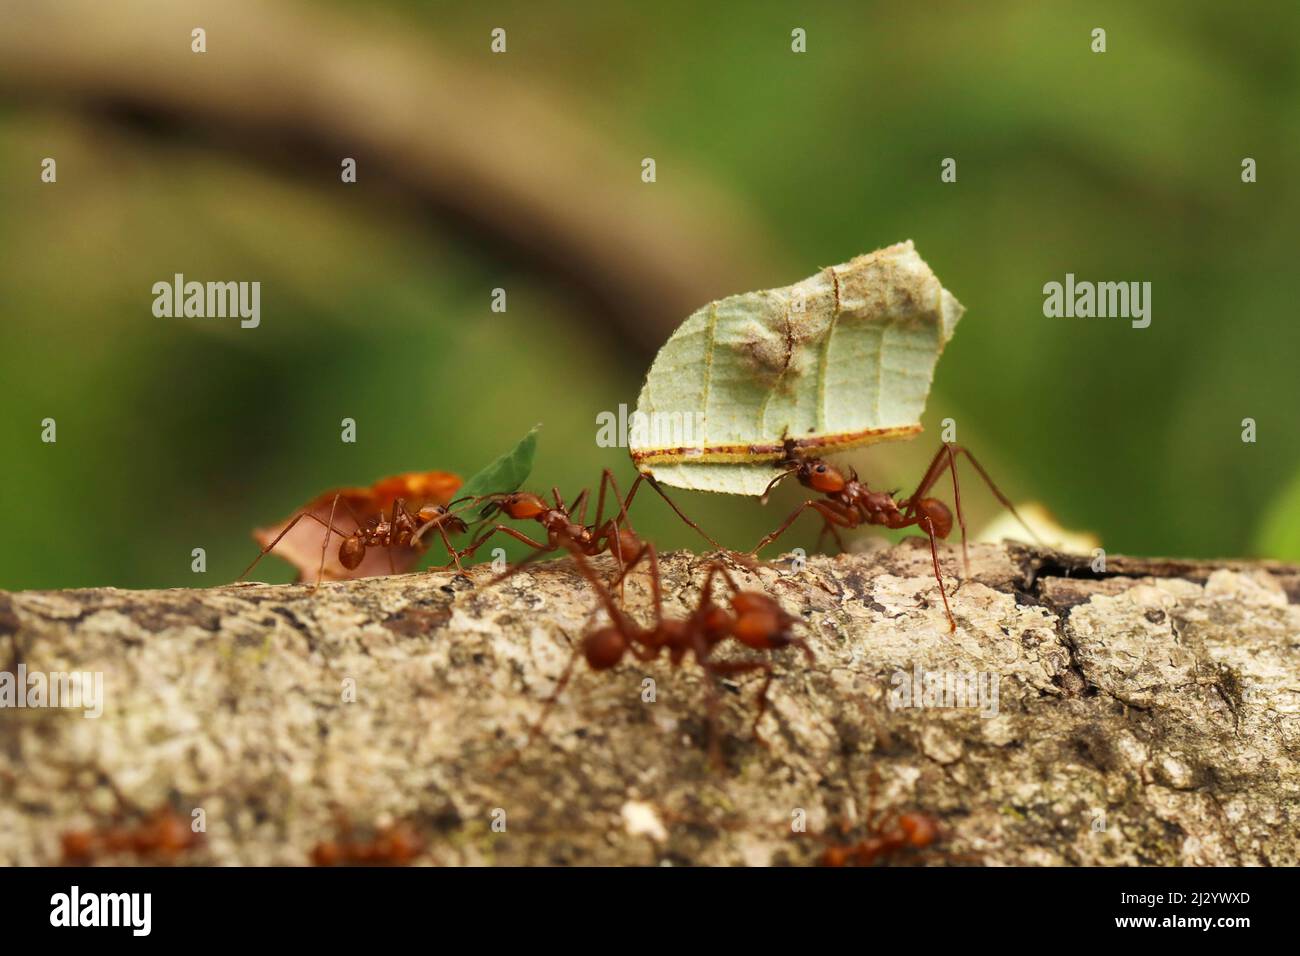 Leaf-Cutter Ant, atta sp., Adult carrying Leaf Segment to Anthill, Costa Rica Stock Photo